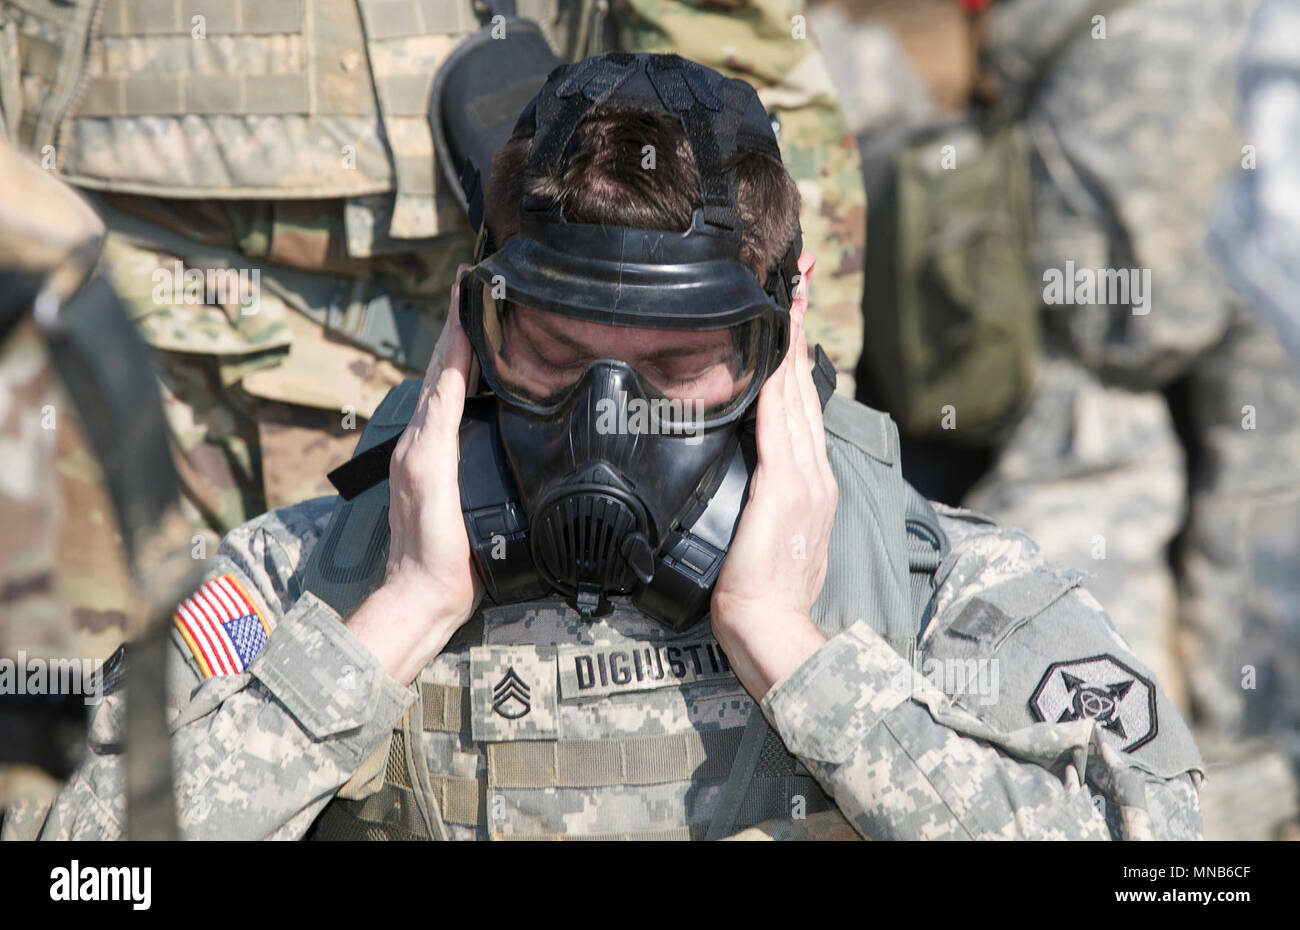 A U.S. Army Reserve Soldier clears an M50, Joint Service General Purpose Mask during chemical, biological, radiological and nuclear defense training at the Combat Support Training Exercise (CSTX) 78-18-03 at Fort Knox, Kentucky, March 15, 2018. CSTX 78-18-03 is a training exercise that ensures America's Army Reserve units and Soldiers are trained and ready to deploy on short-notice and bring capable, combat-ready and lethal firepower in support of the Army and our joint partners anywhere in the world. (U.S. Army Reserve Stock Photo